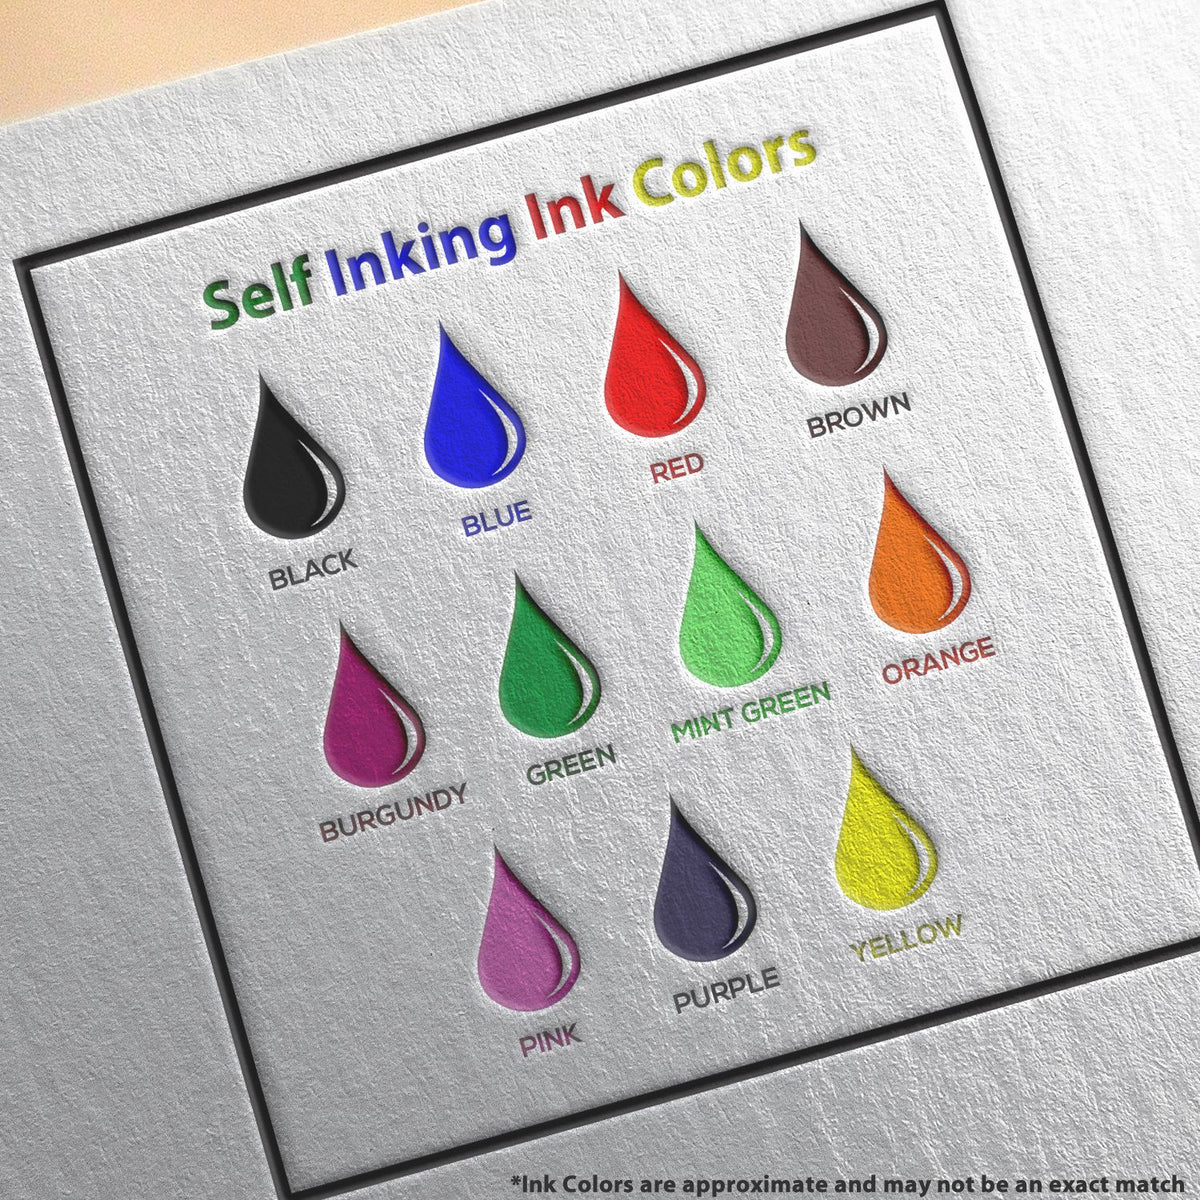 A picture showing the different ink colors or hues available for the Self-Inking Massachusetts PE Stamp product.